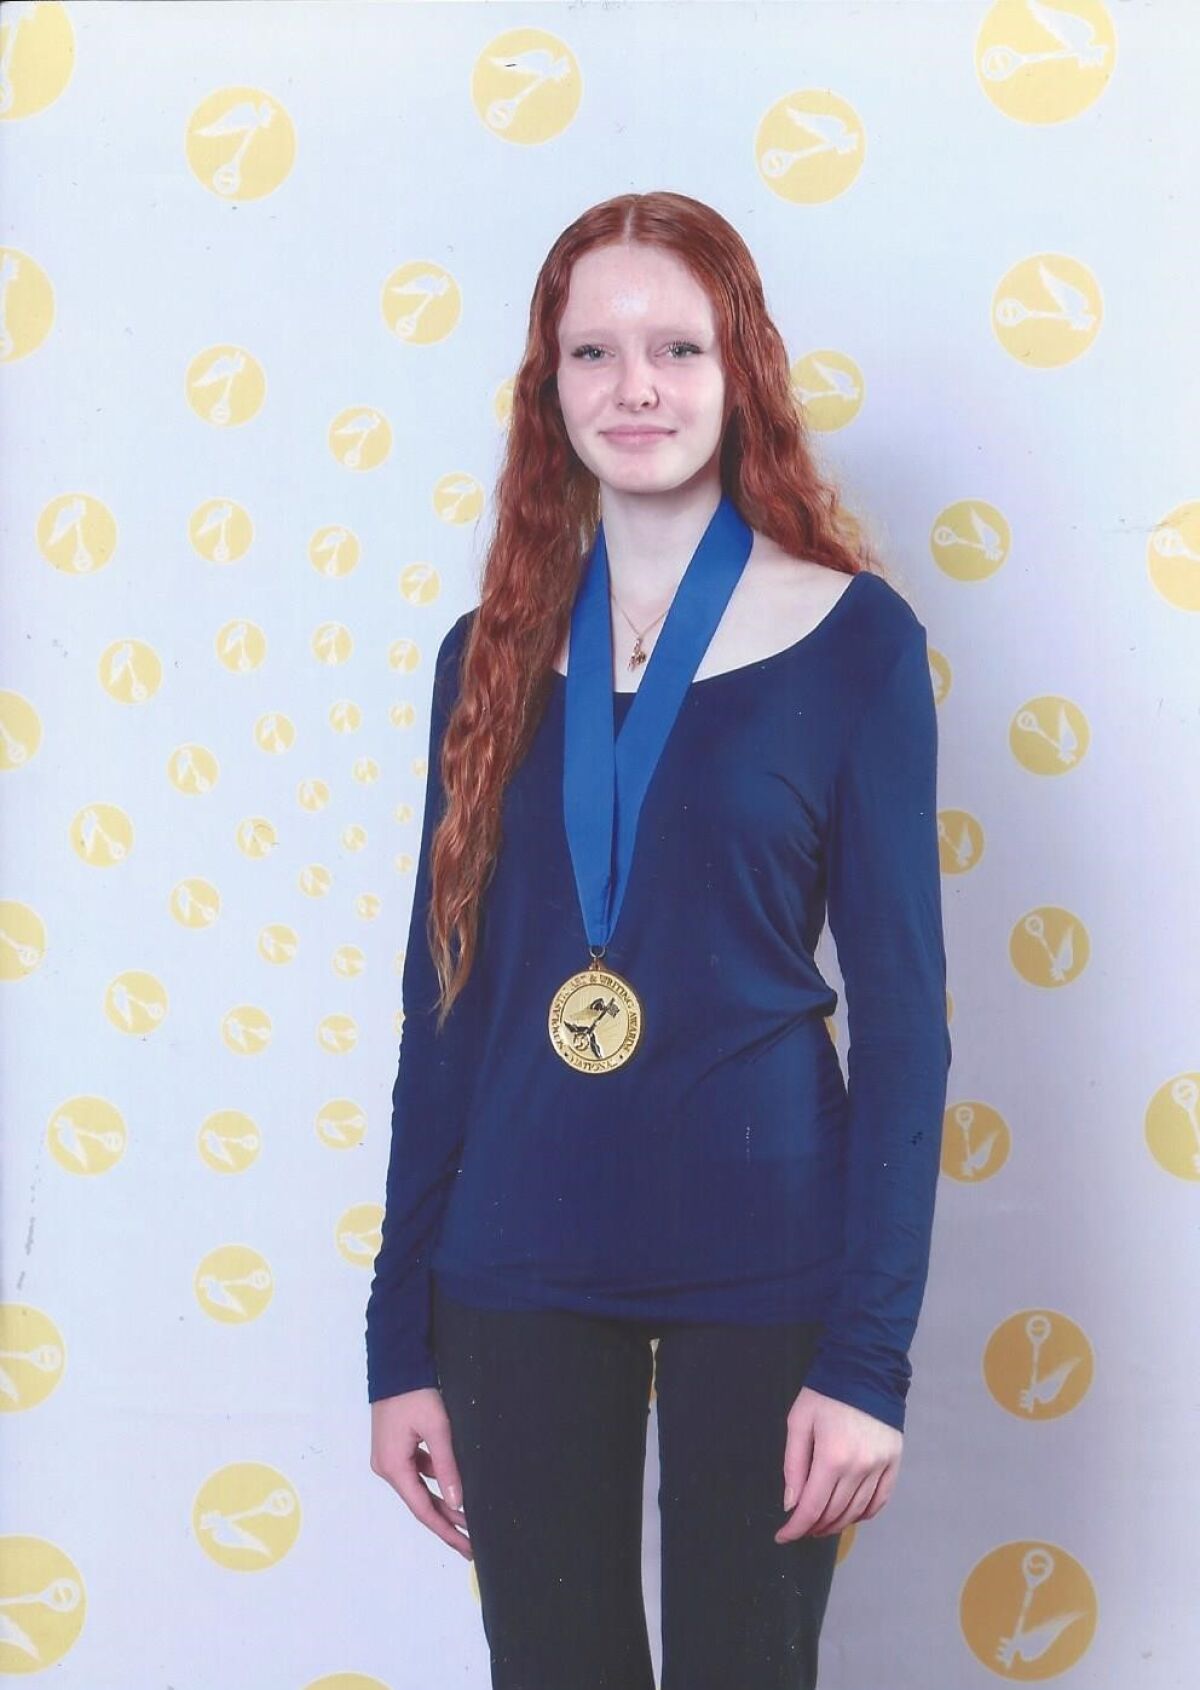 Madeline Sornson, an incoming sophomore at La Jolla High School, won a gold medal for her short play.